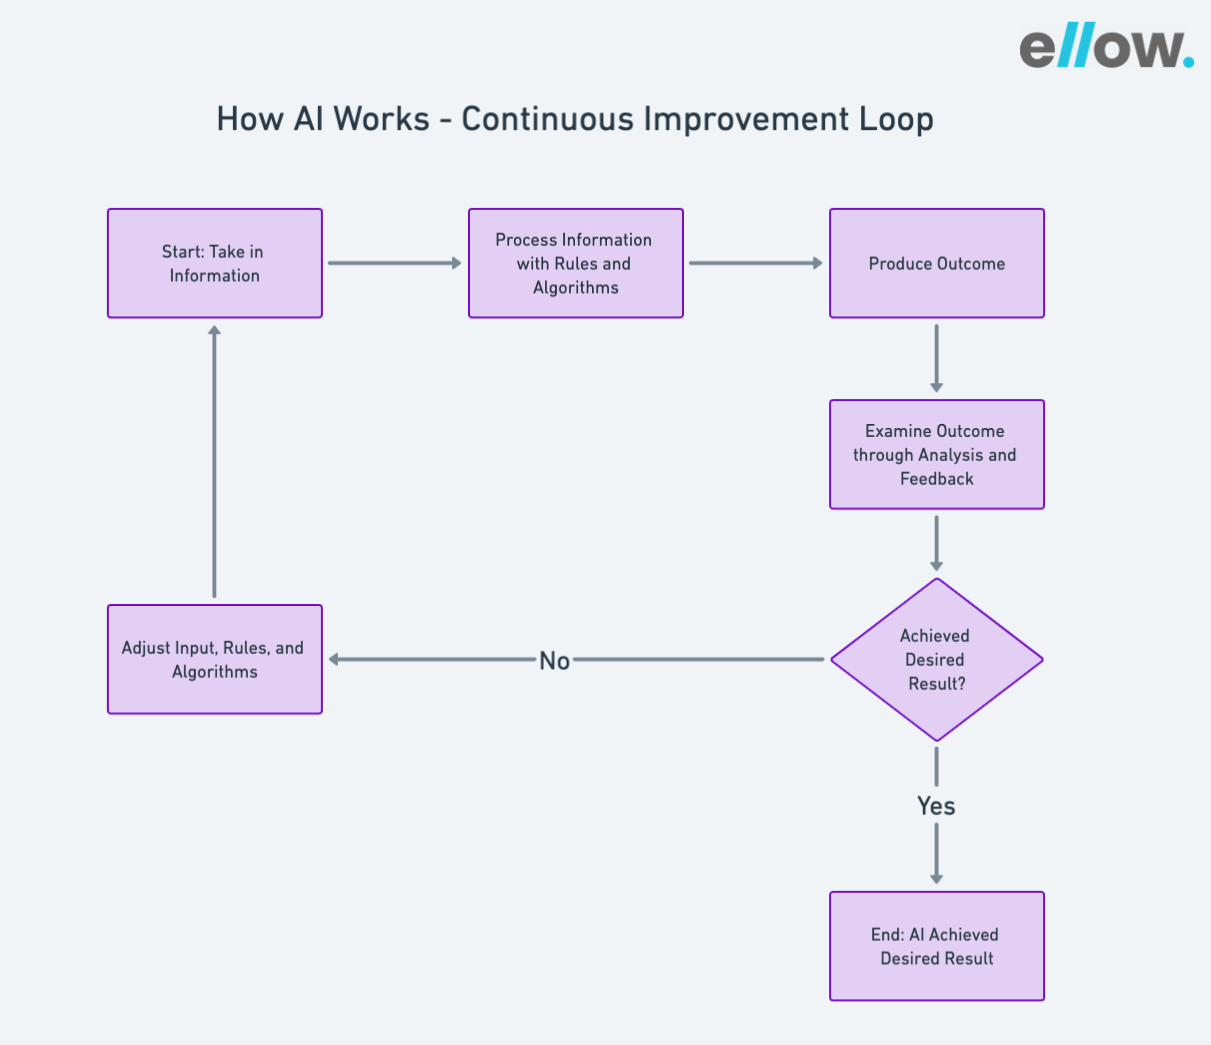 How AI Works - Continuous Improvement Loop